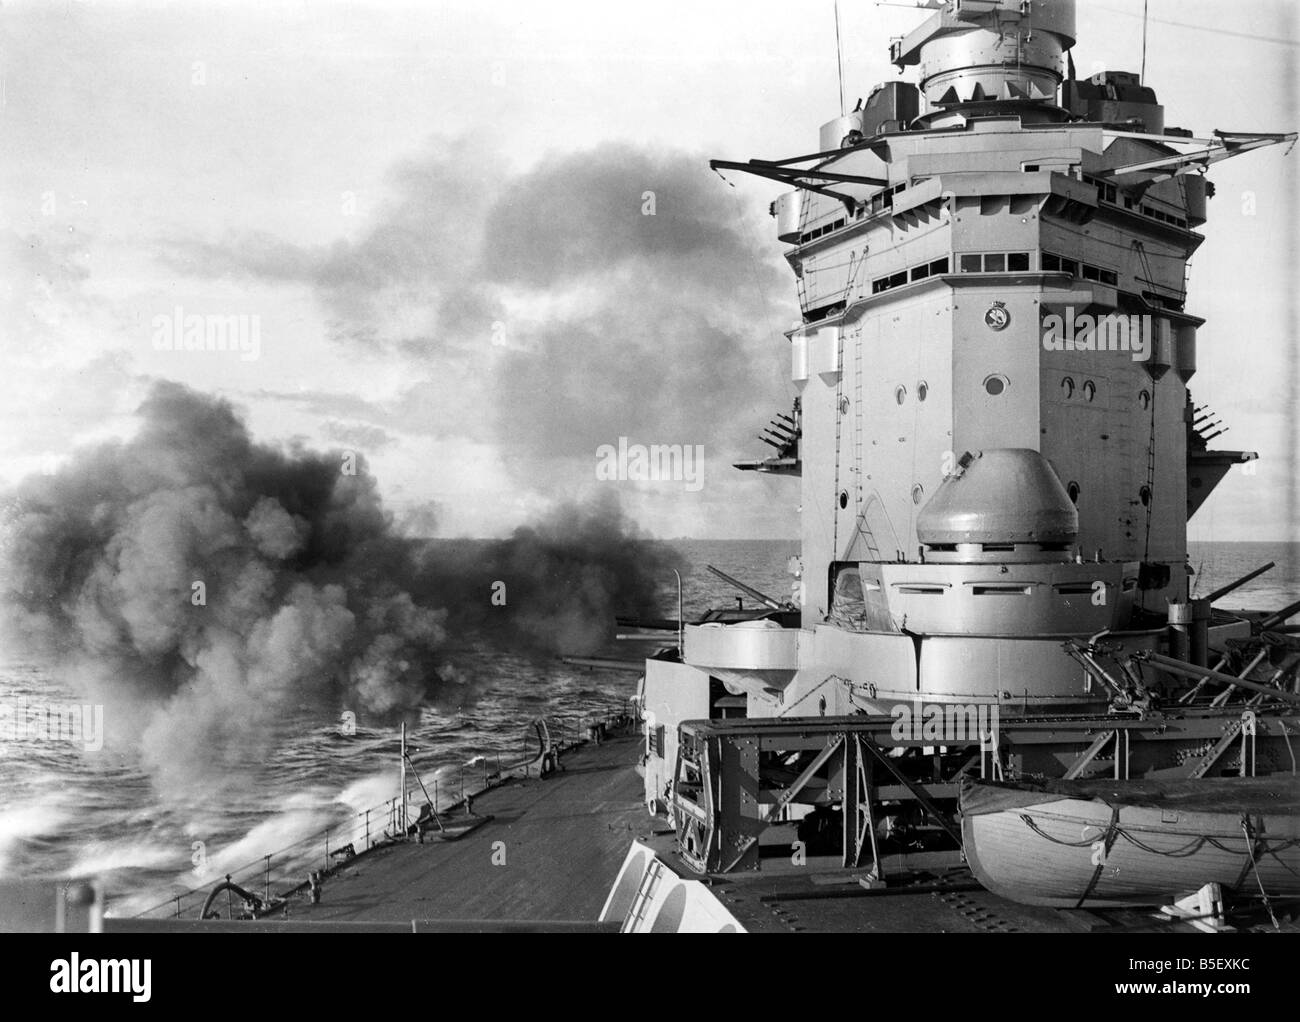 British battleship HMS Rodney of the Royal Navy firing her secondary armament of six inch guns during exercises at sea in the Second World War;December 1940; Stock Photo